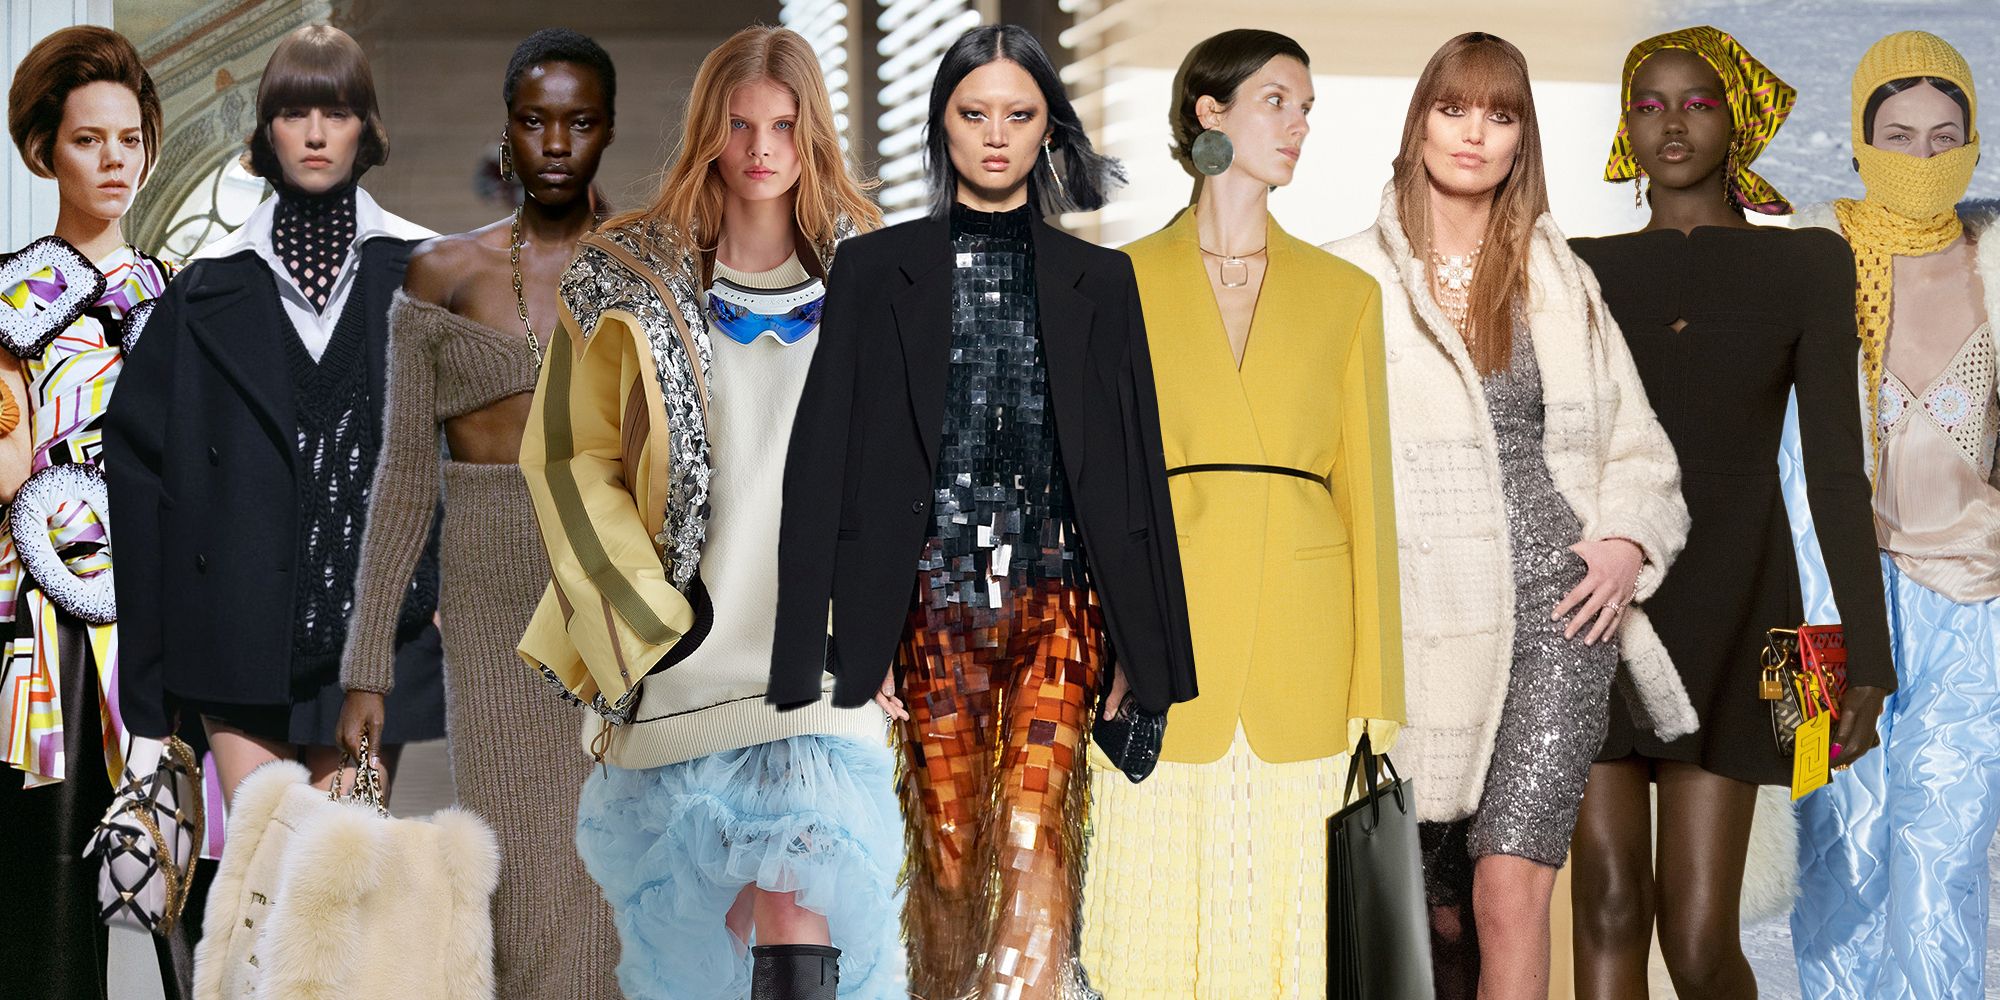 2021 Fashion Trends For Fall/Winter, According To The Runways